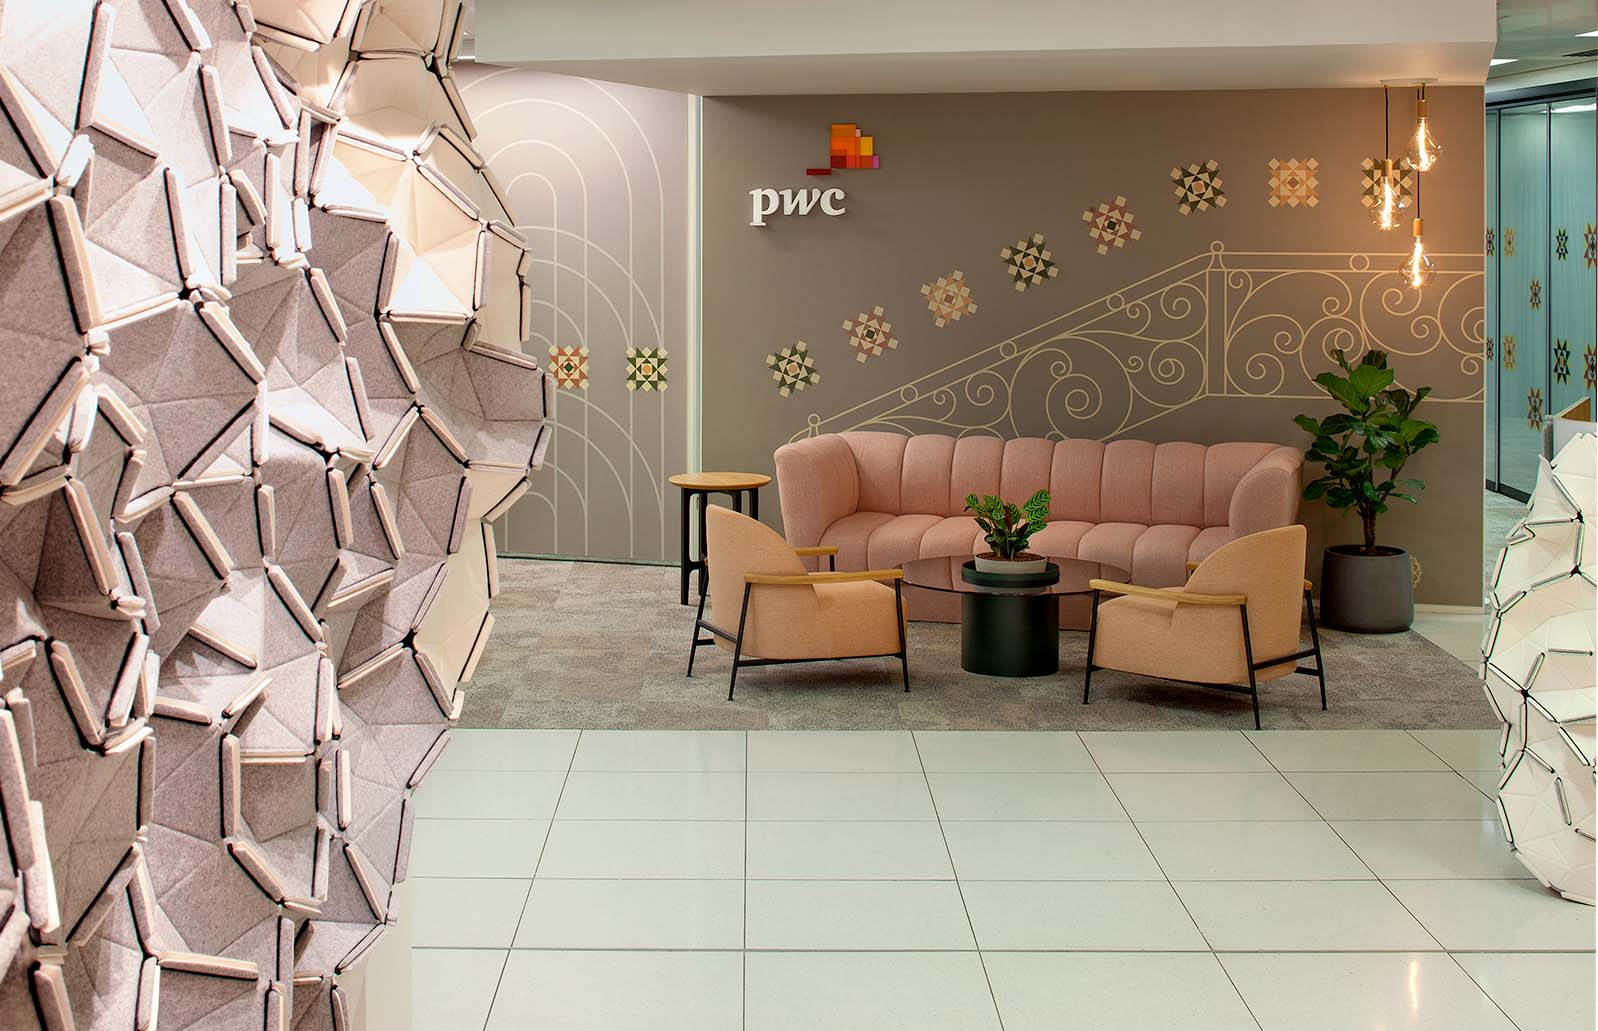 The design at PwC Glasgow aims to help reduce anxiety and create calm and welcoming environment